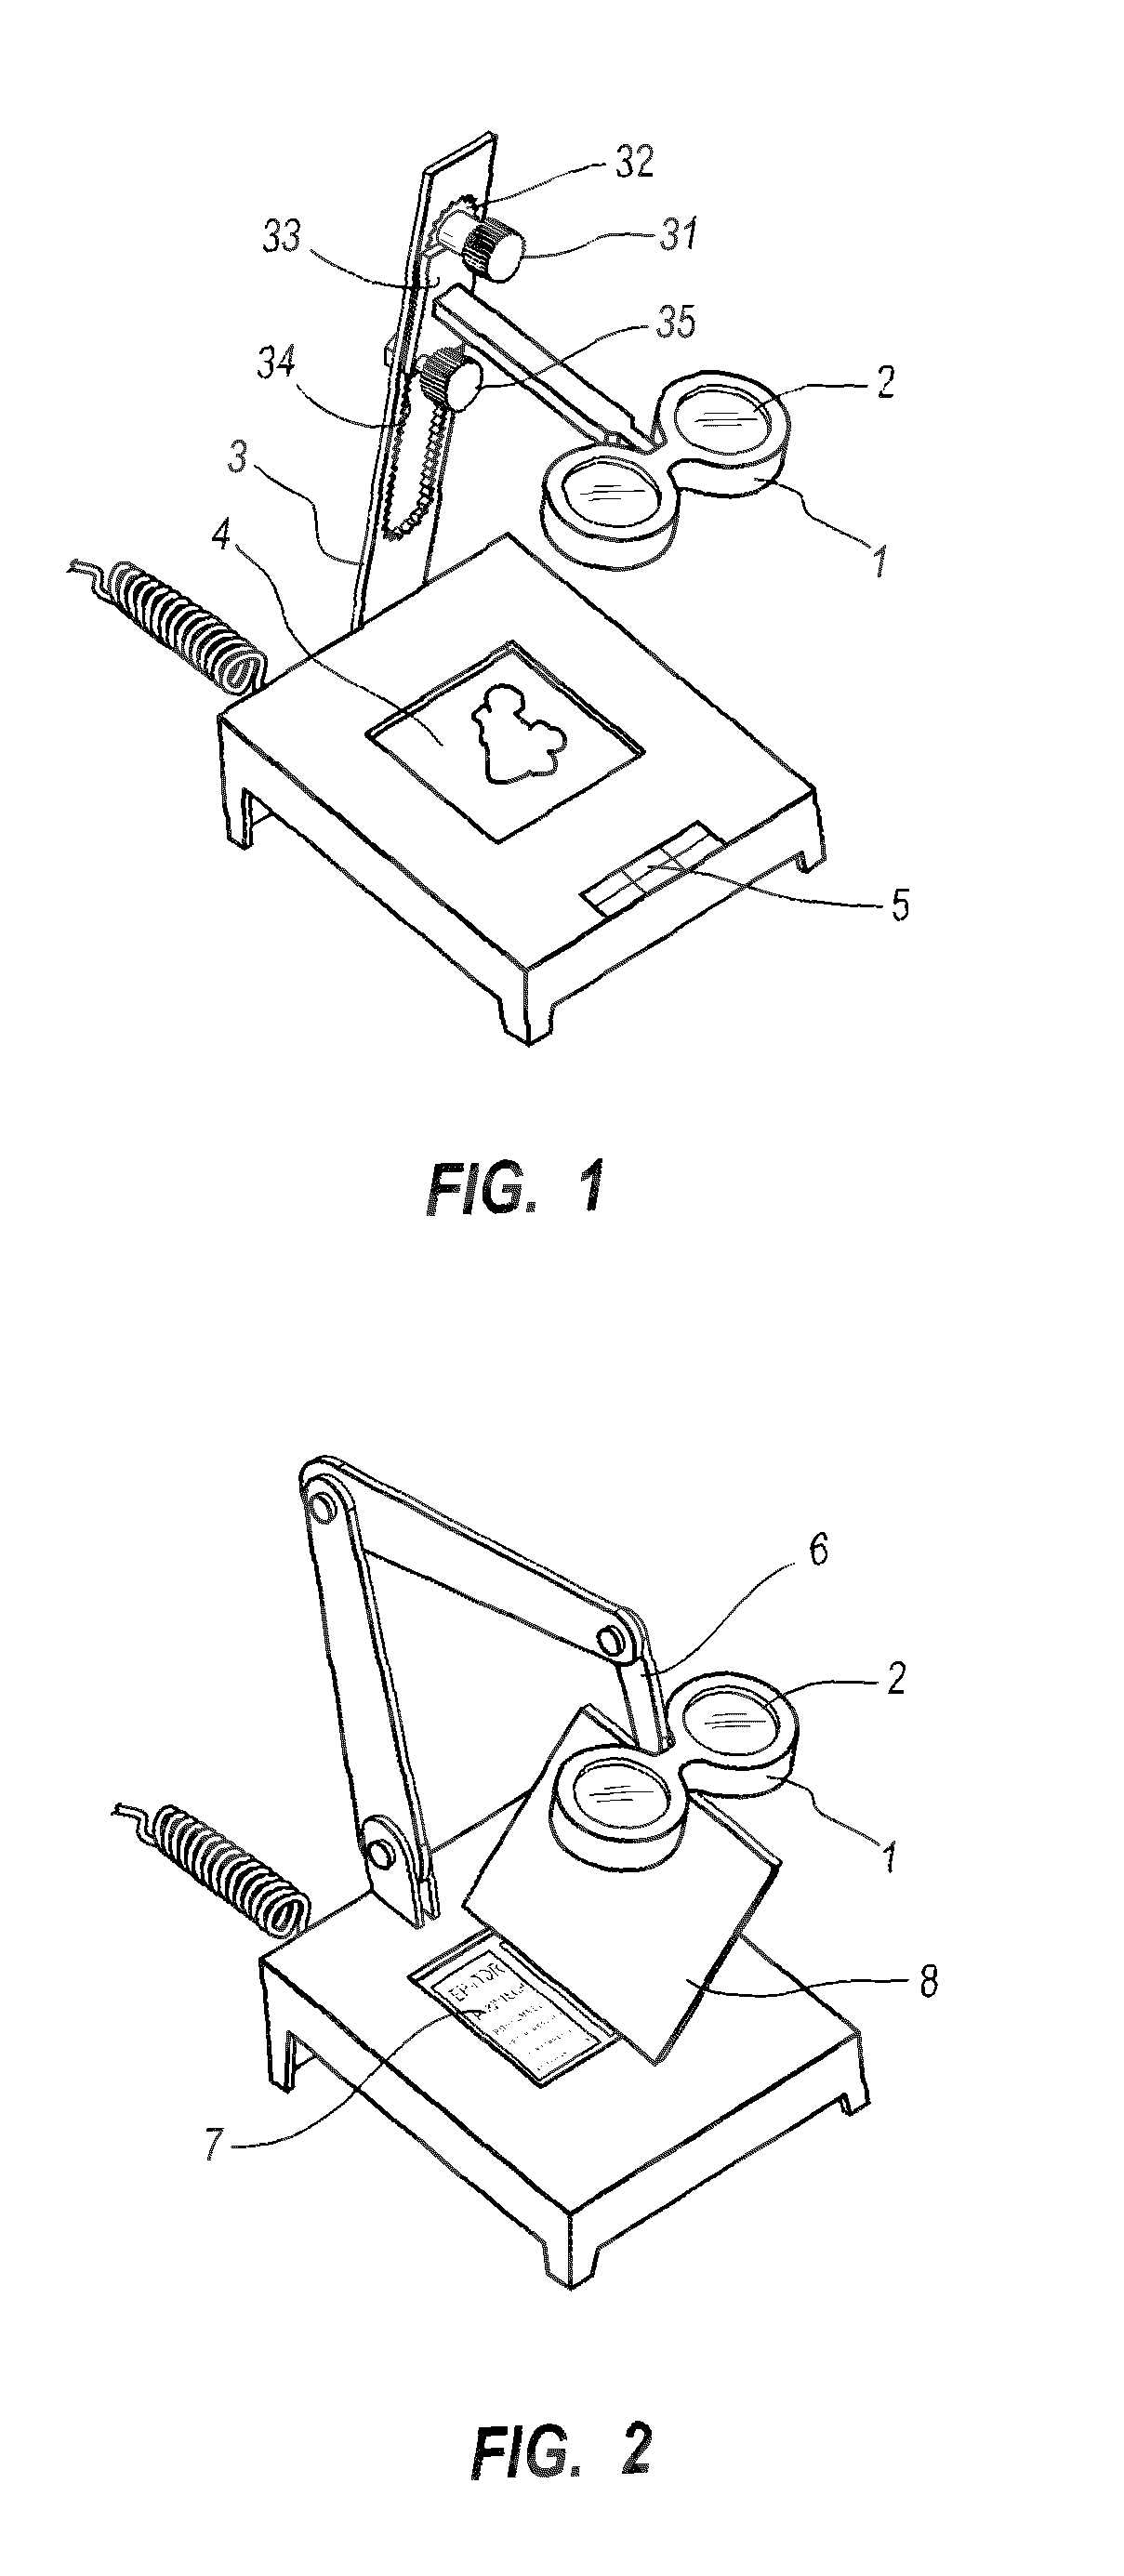 Device for preventing and treating myopia